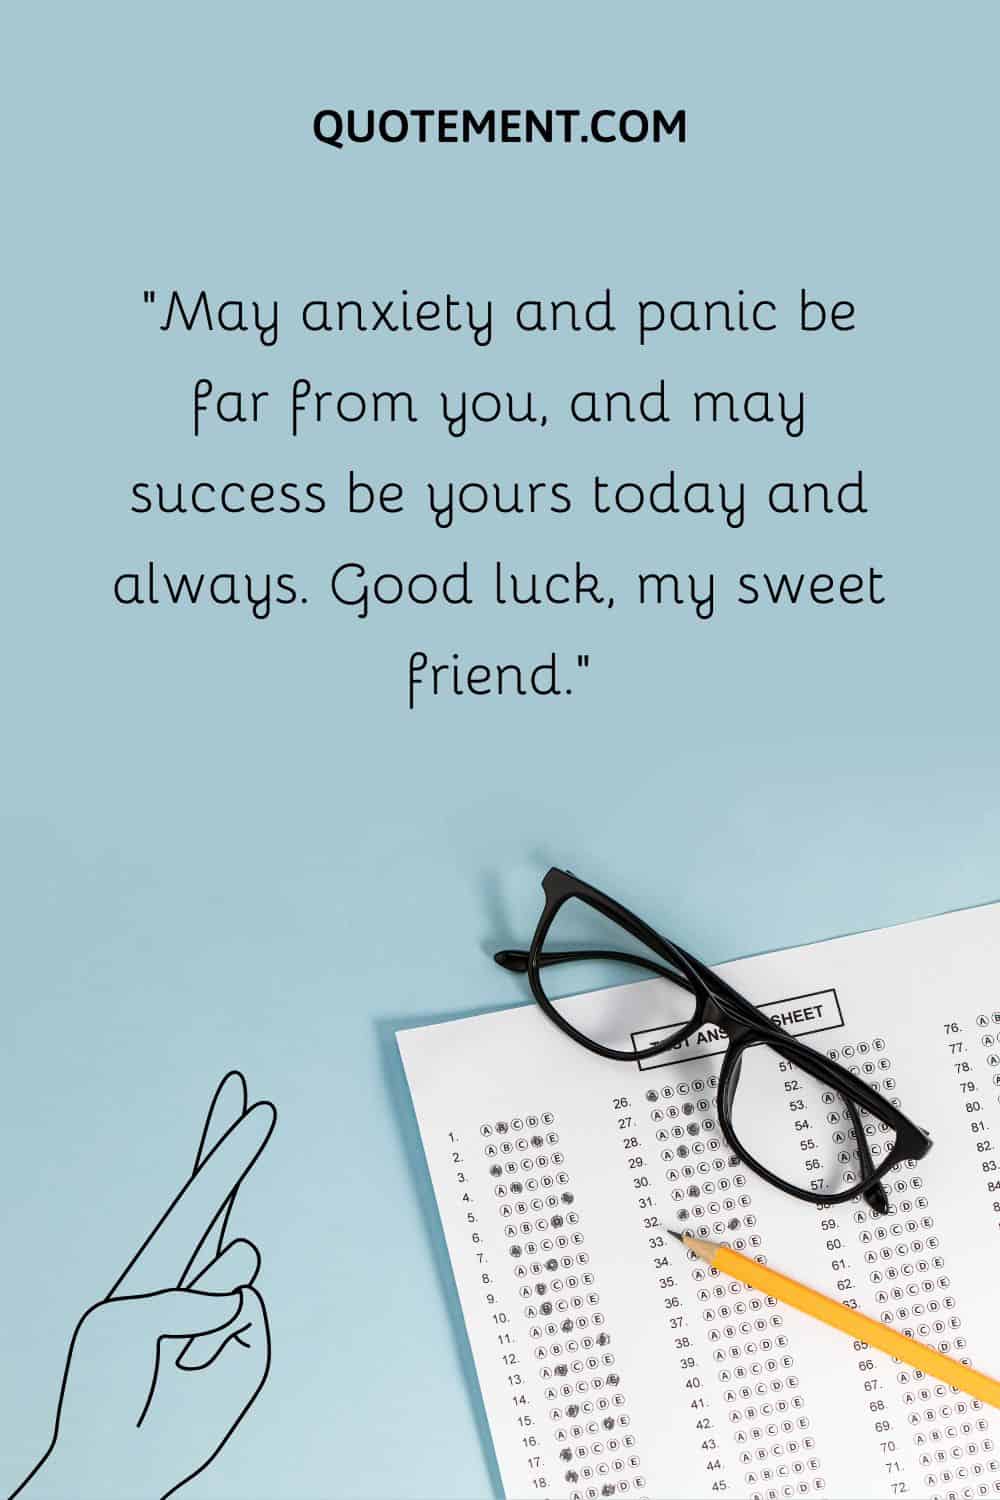 May anxiety and panic be far from you